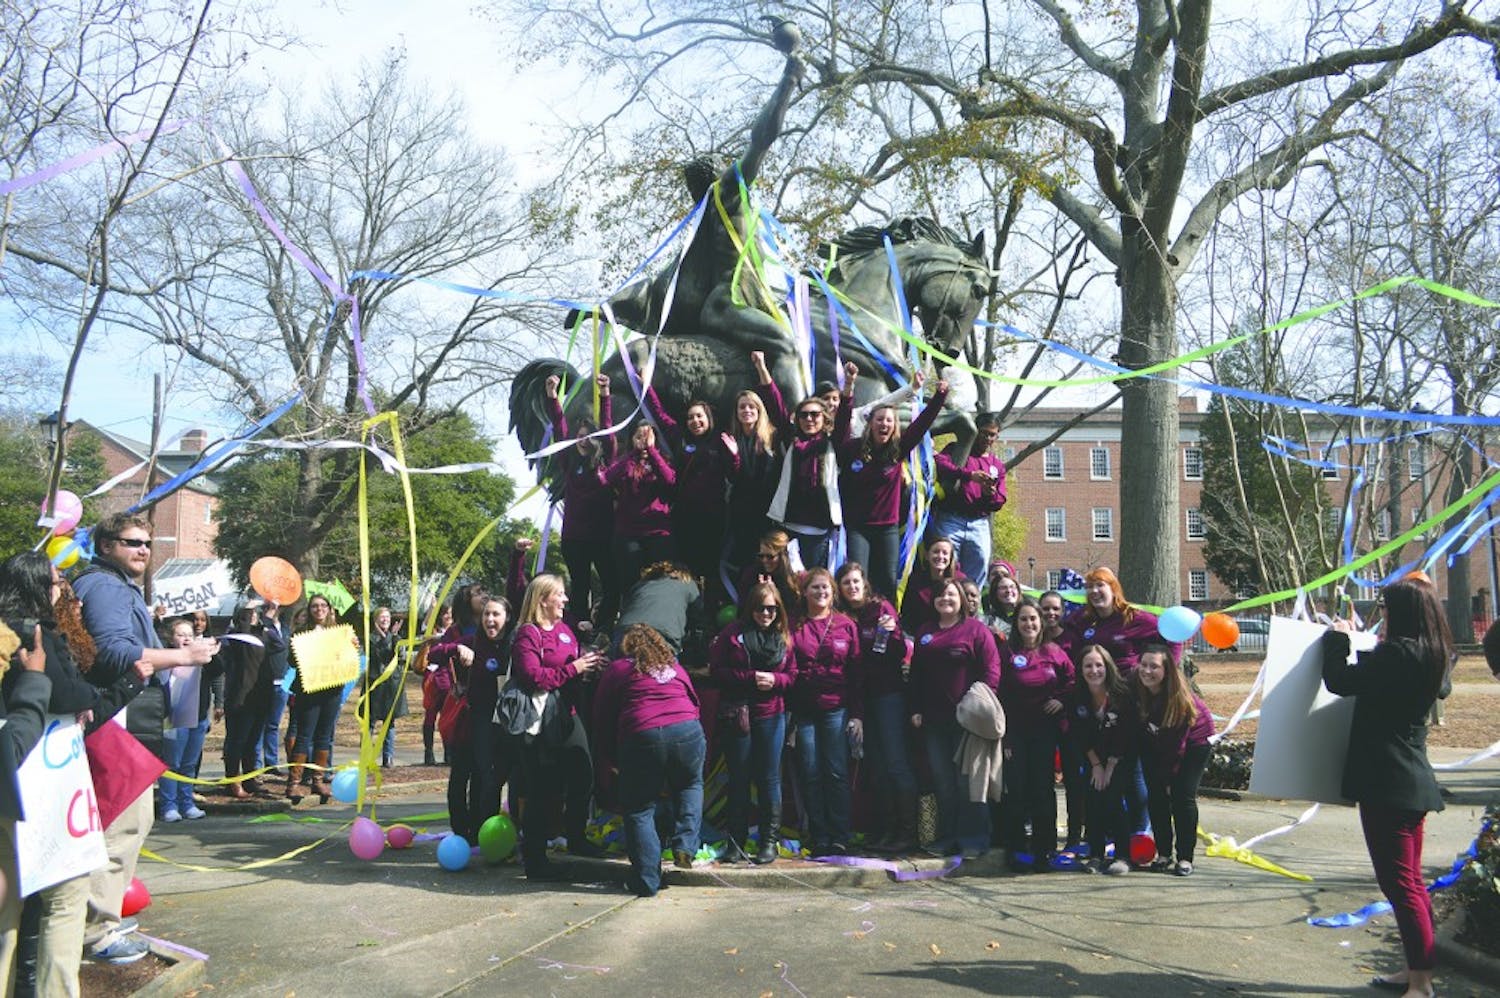 	Higher education and student affairs (HESA) graduate students ran from Wardlaw College to &#8220;The Torchbearer&#8221; statue in celebration after completing their final comprehensive exam Friday afternoon.